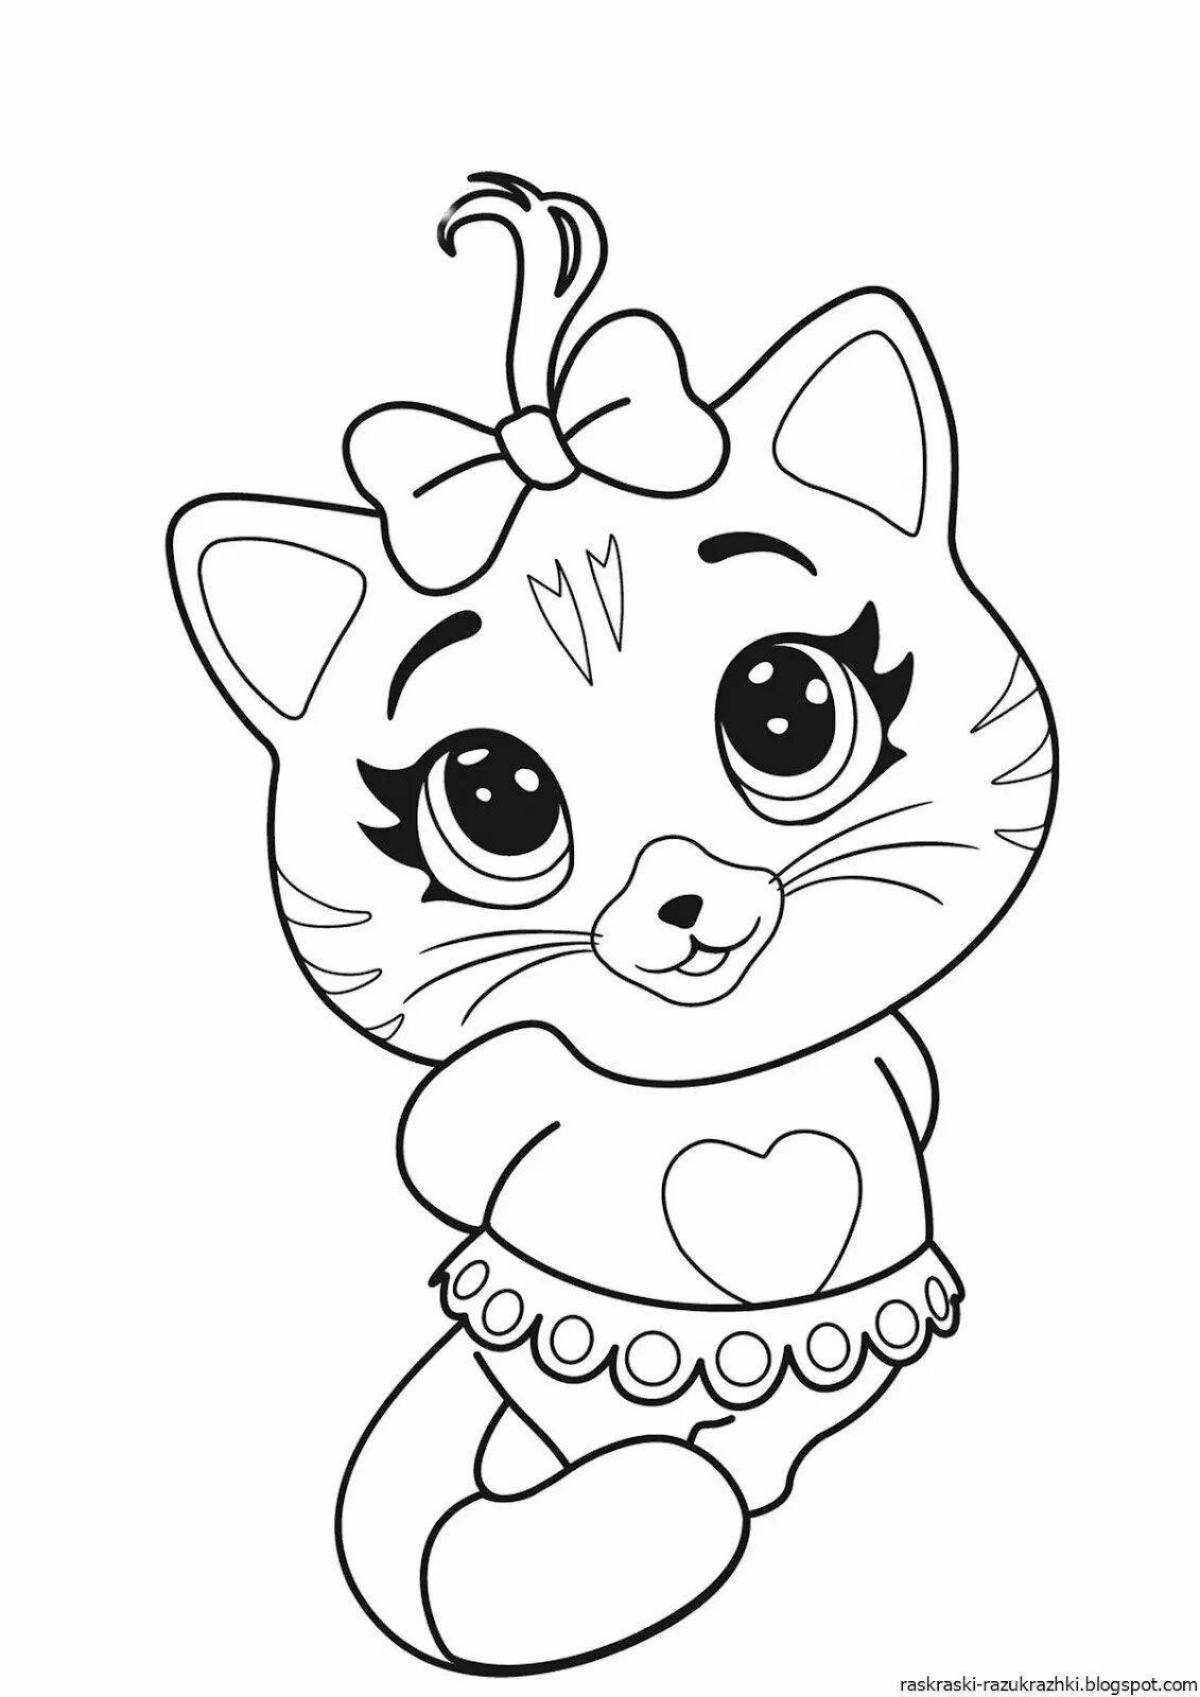 Violent kitty coloring book for kids